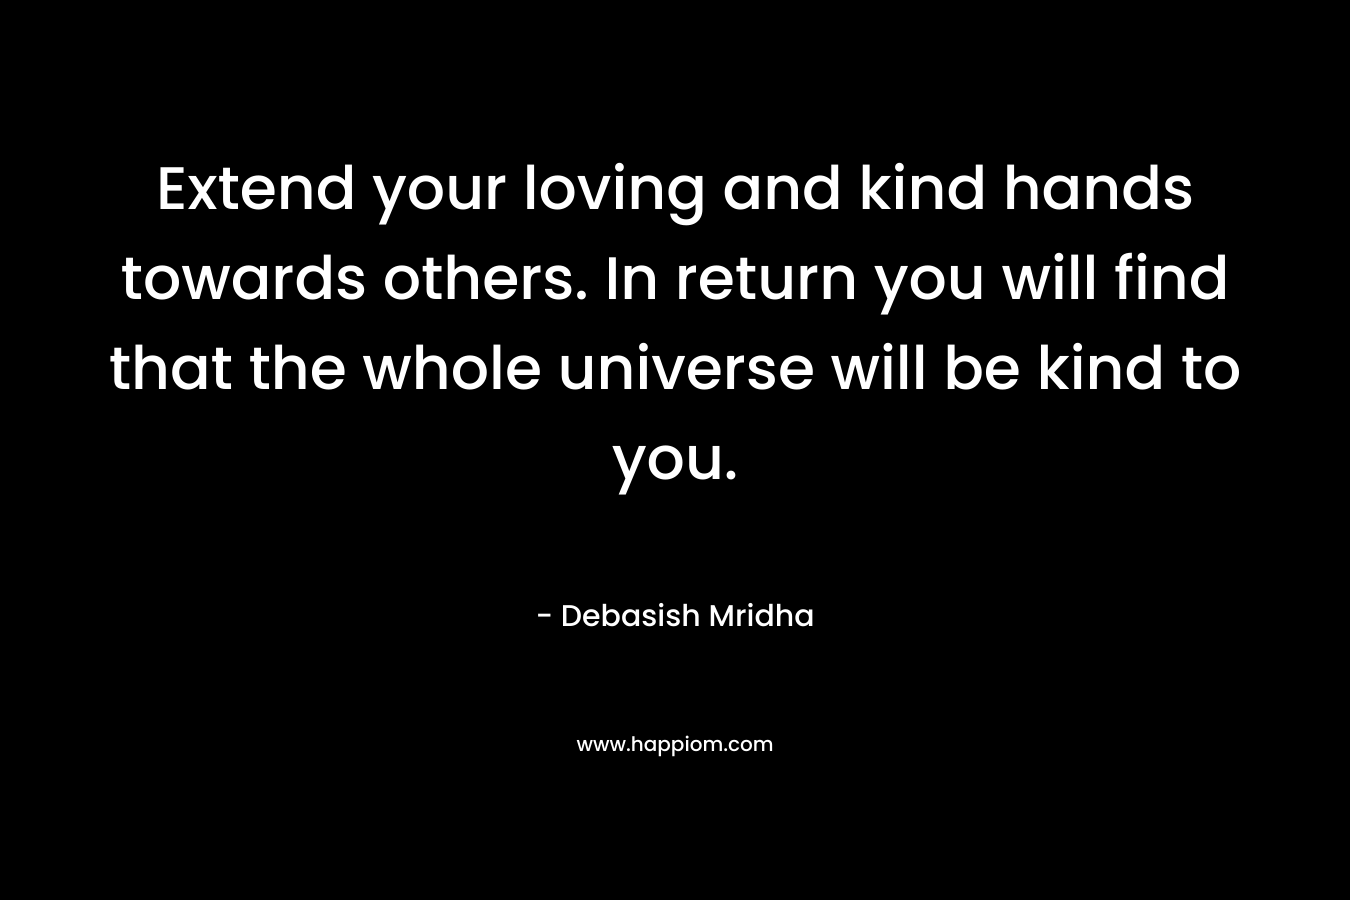 Extend your loving and kind hands towards others. In return you will find that the whole universe will be kind to you. – Debasish Mridha